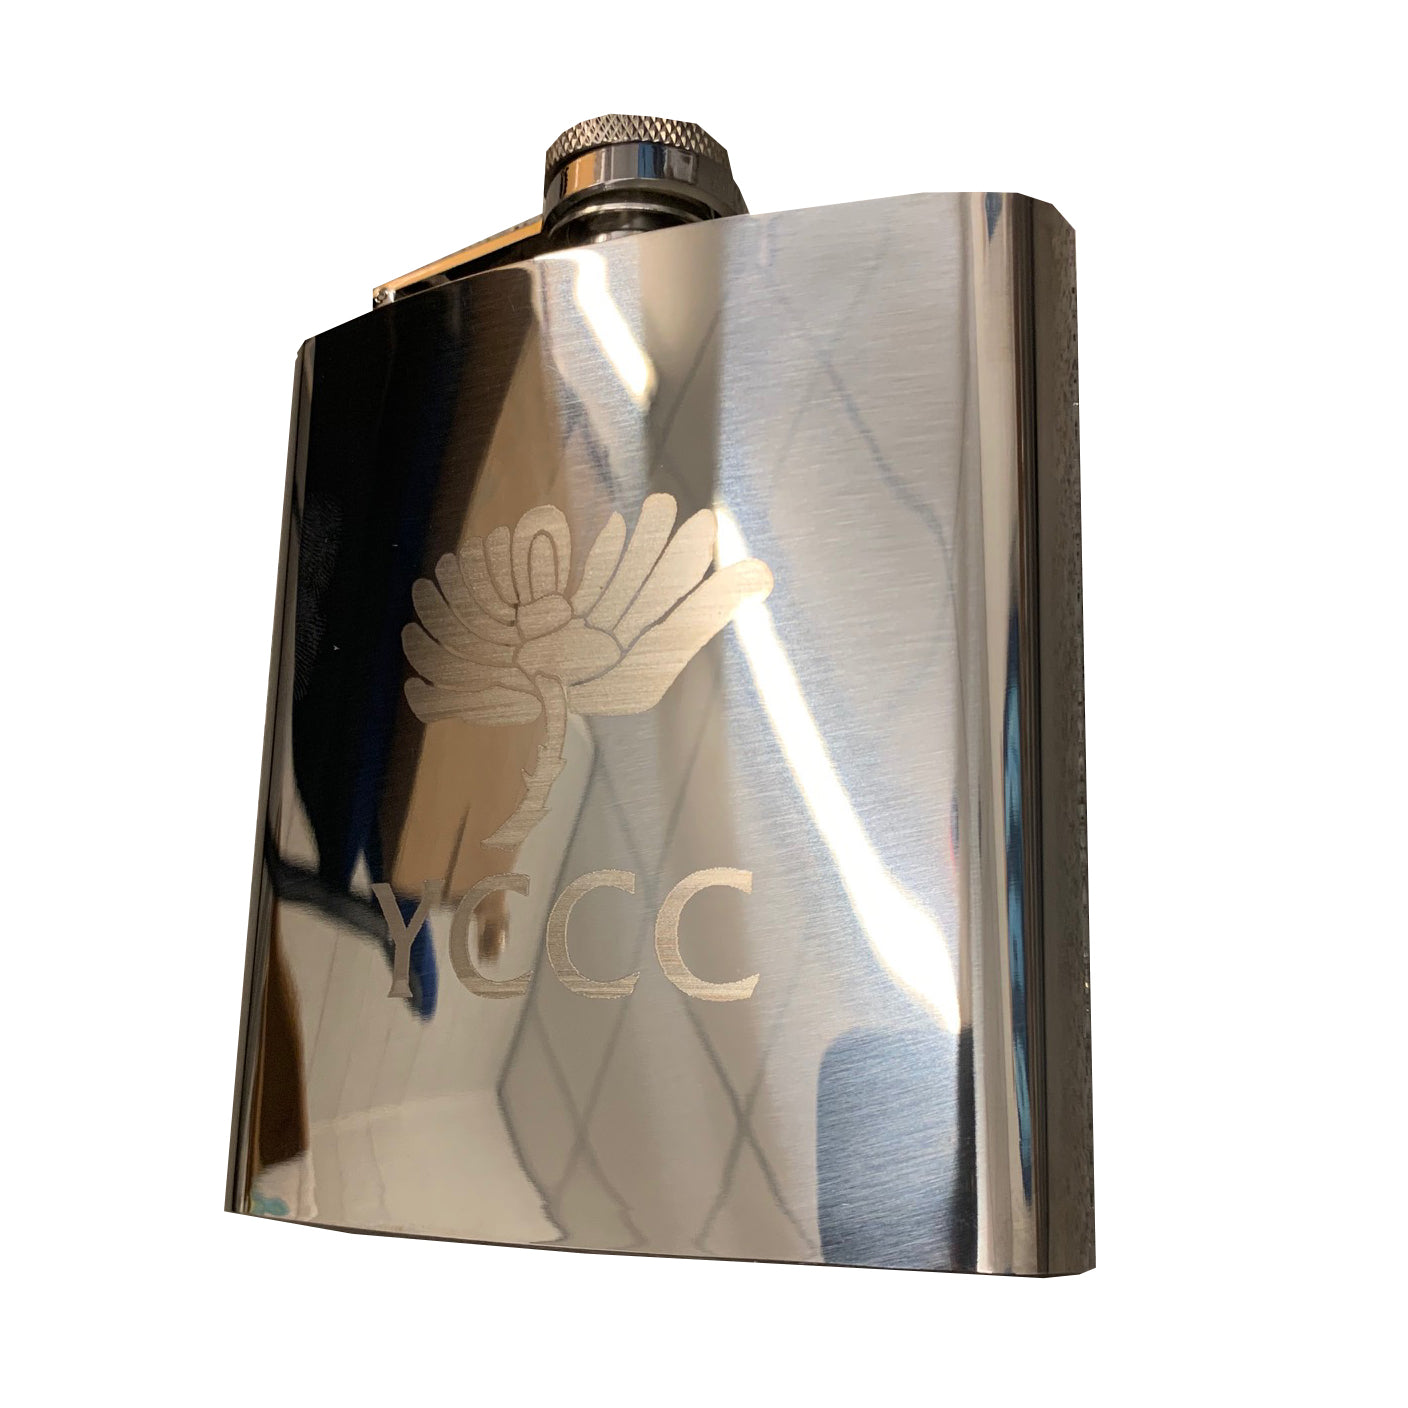 Hip flask in gift box